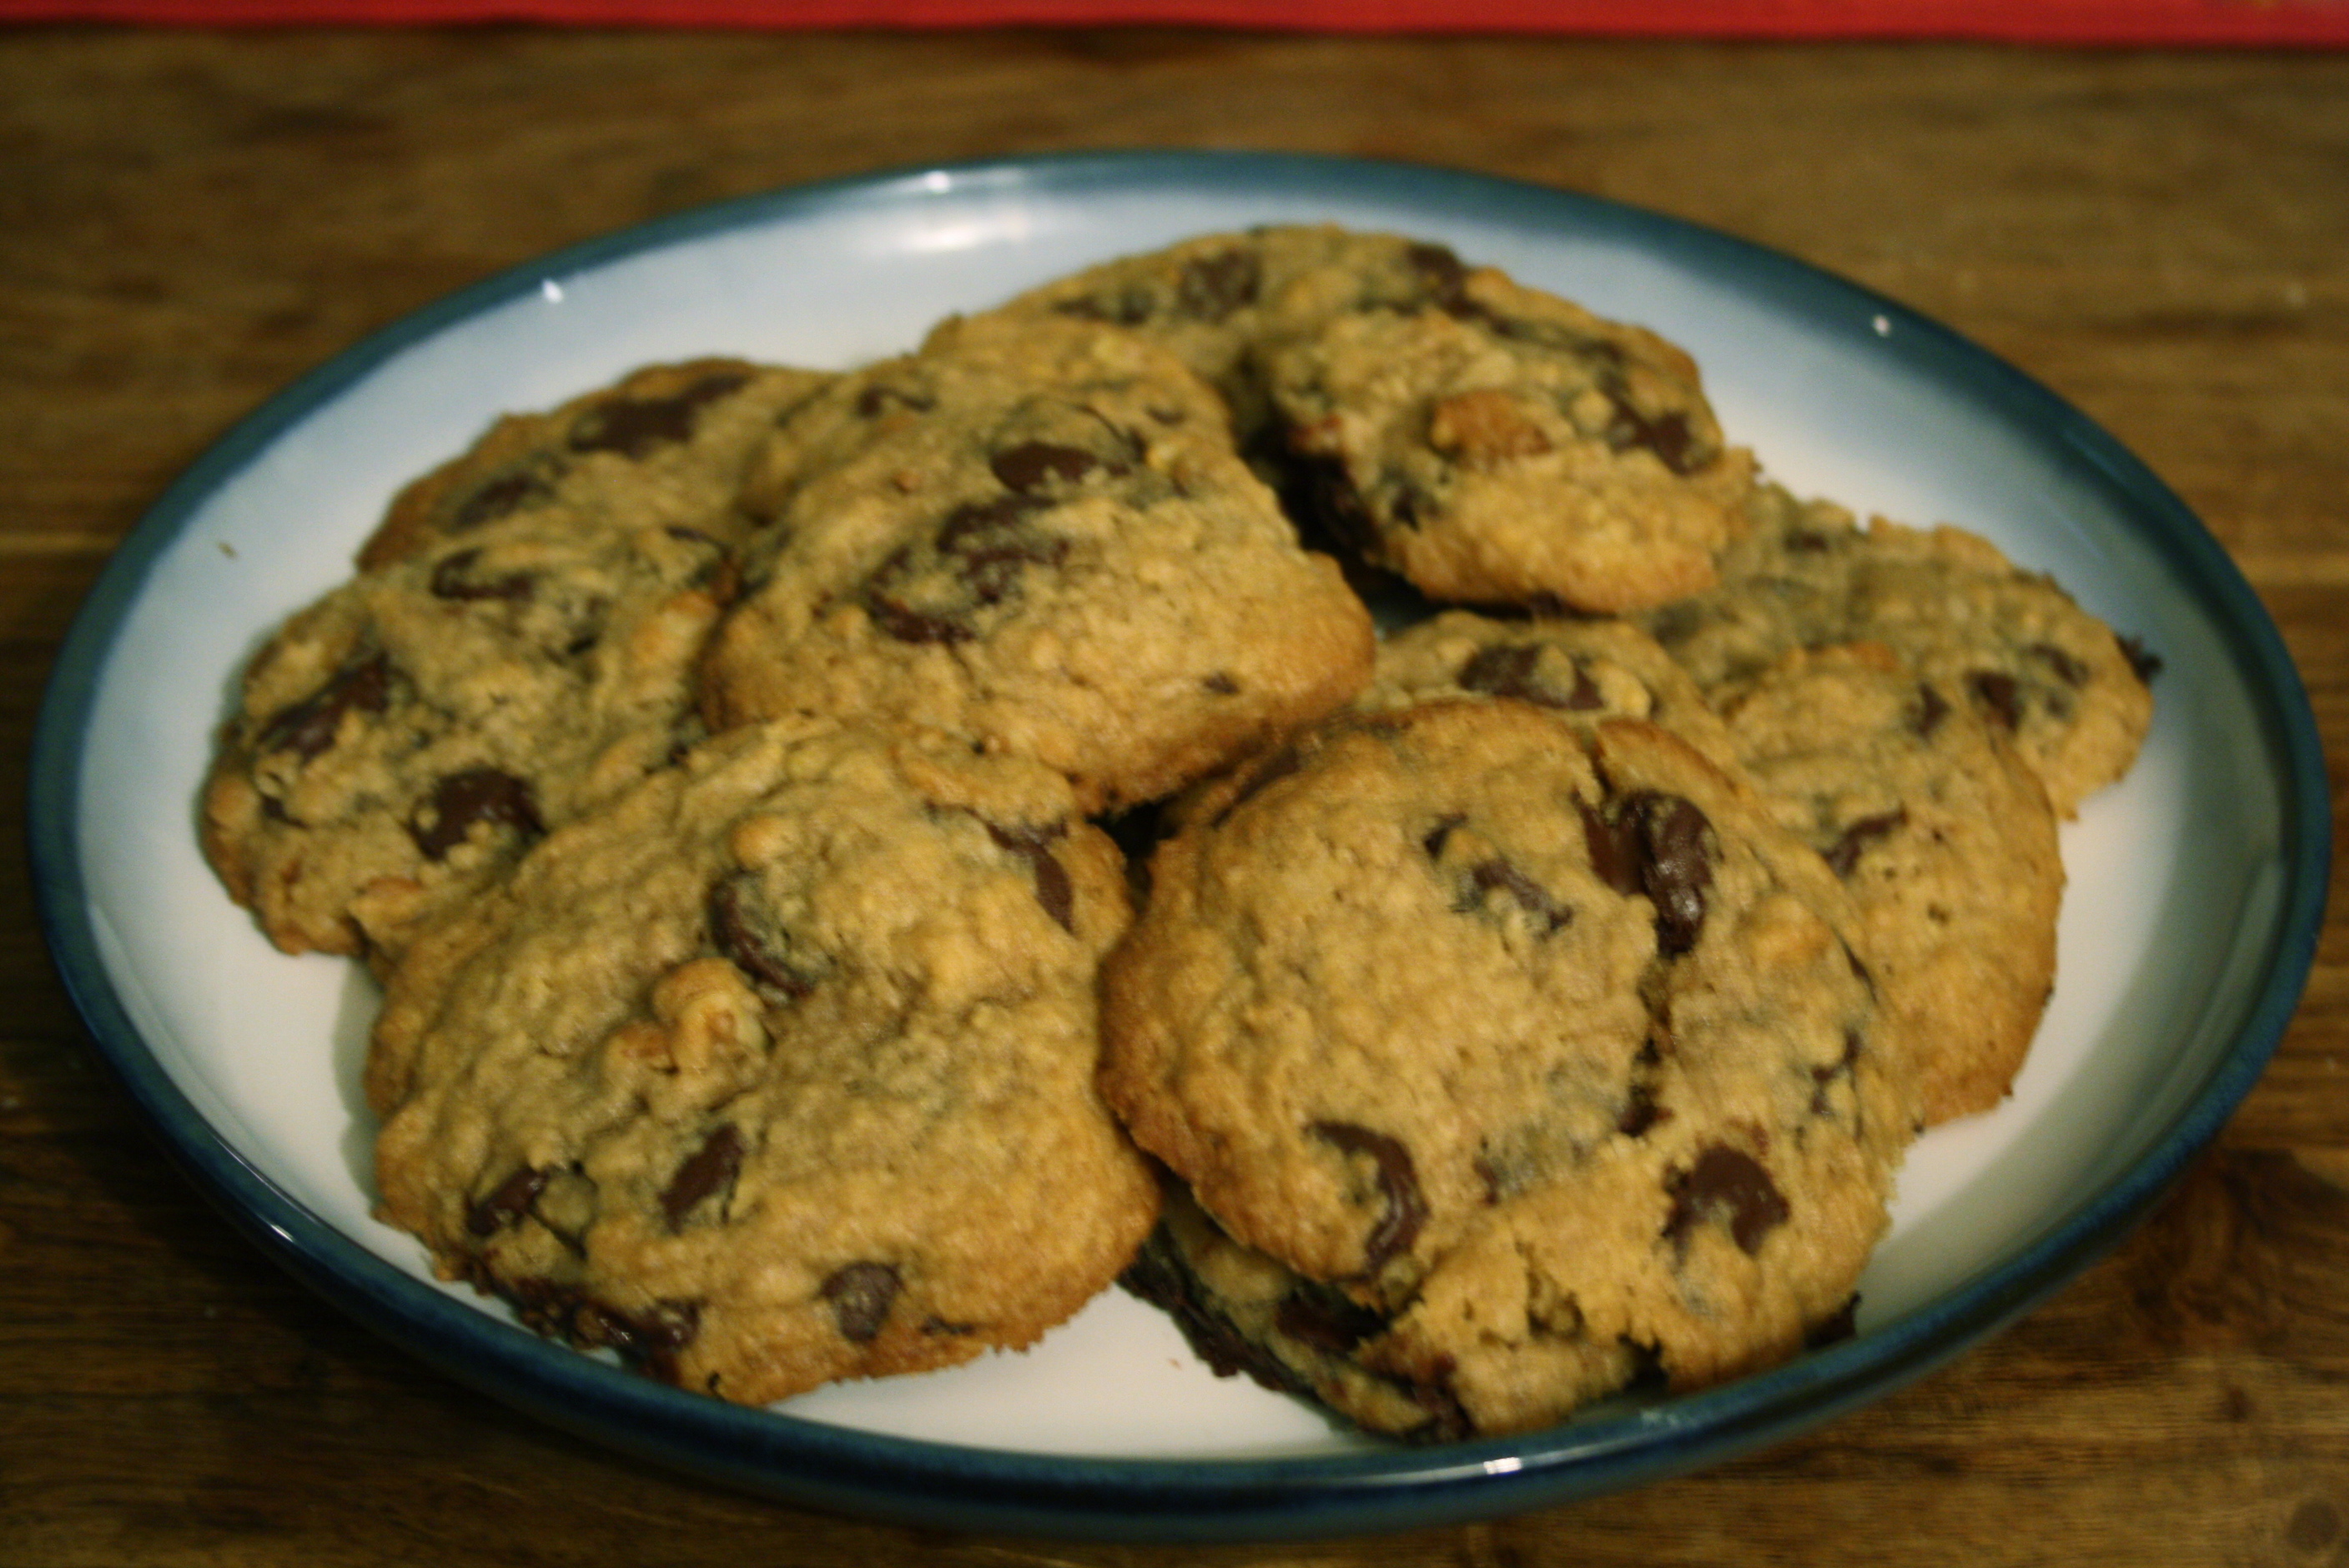 Chocolate chip cookies!